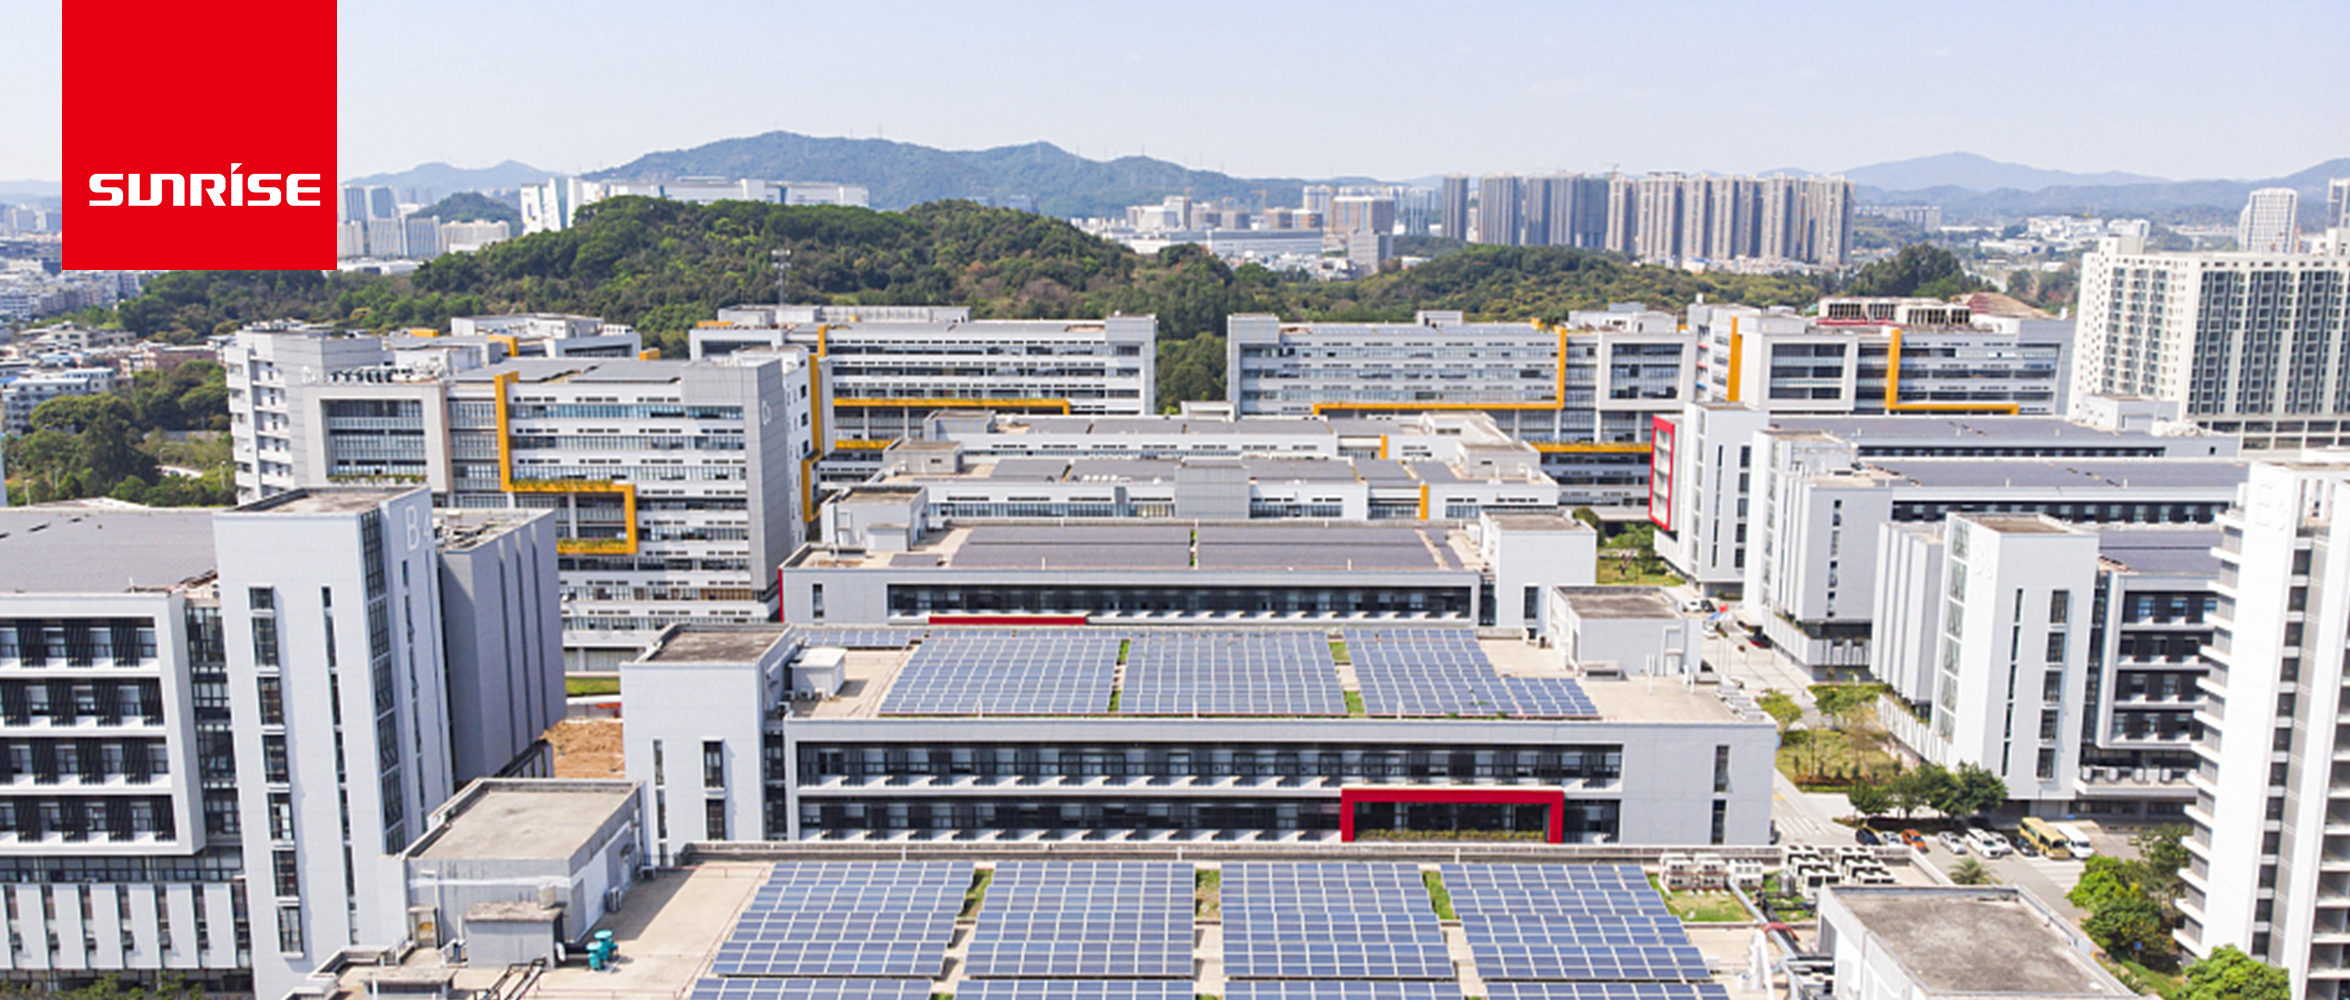 Application of Solar Photovoltaic Power Generation System in Buildings